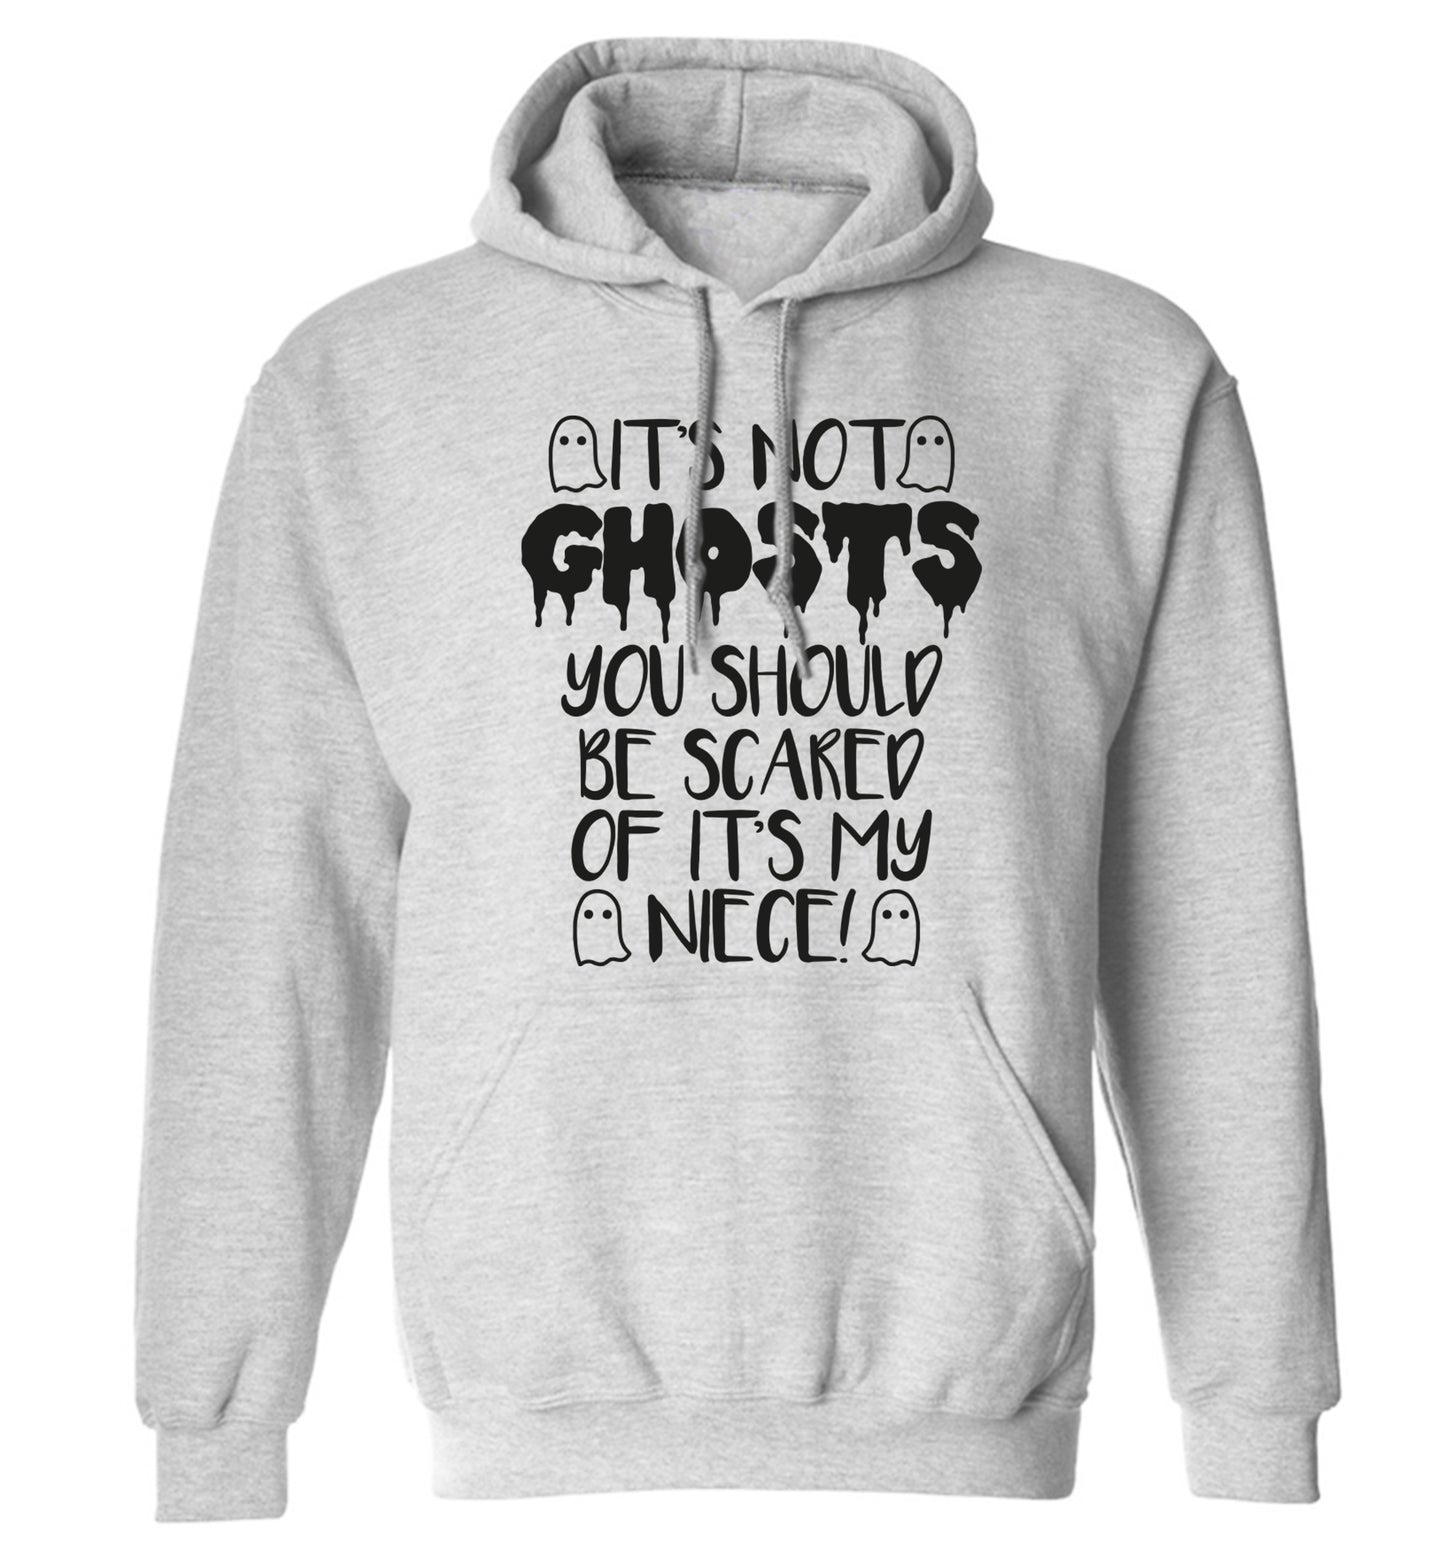 It's not ghosts you should be scared of it's my niece! adults unisex grey hoodie 2XL